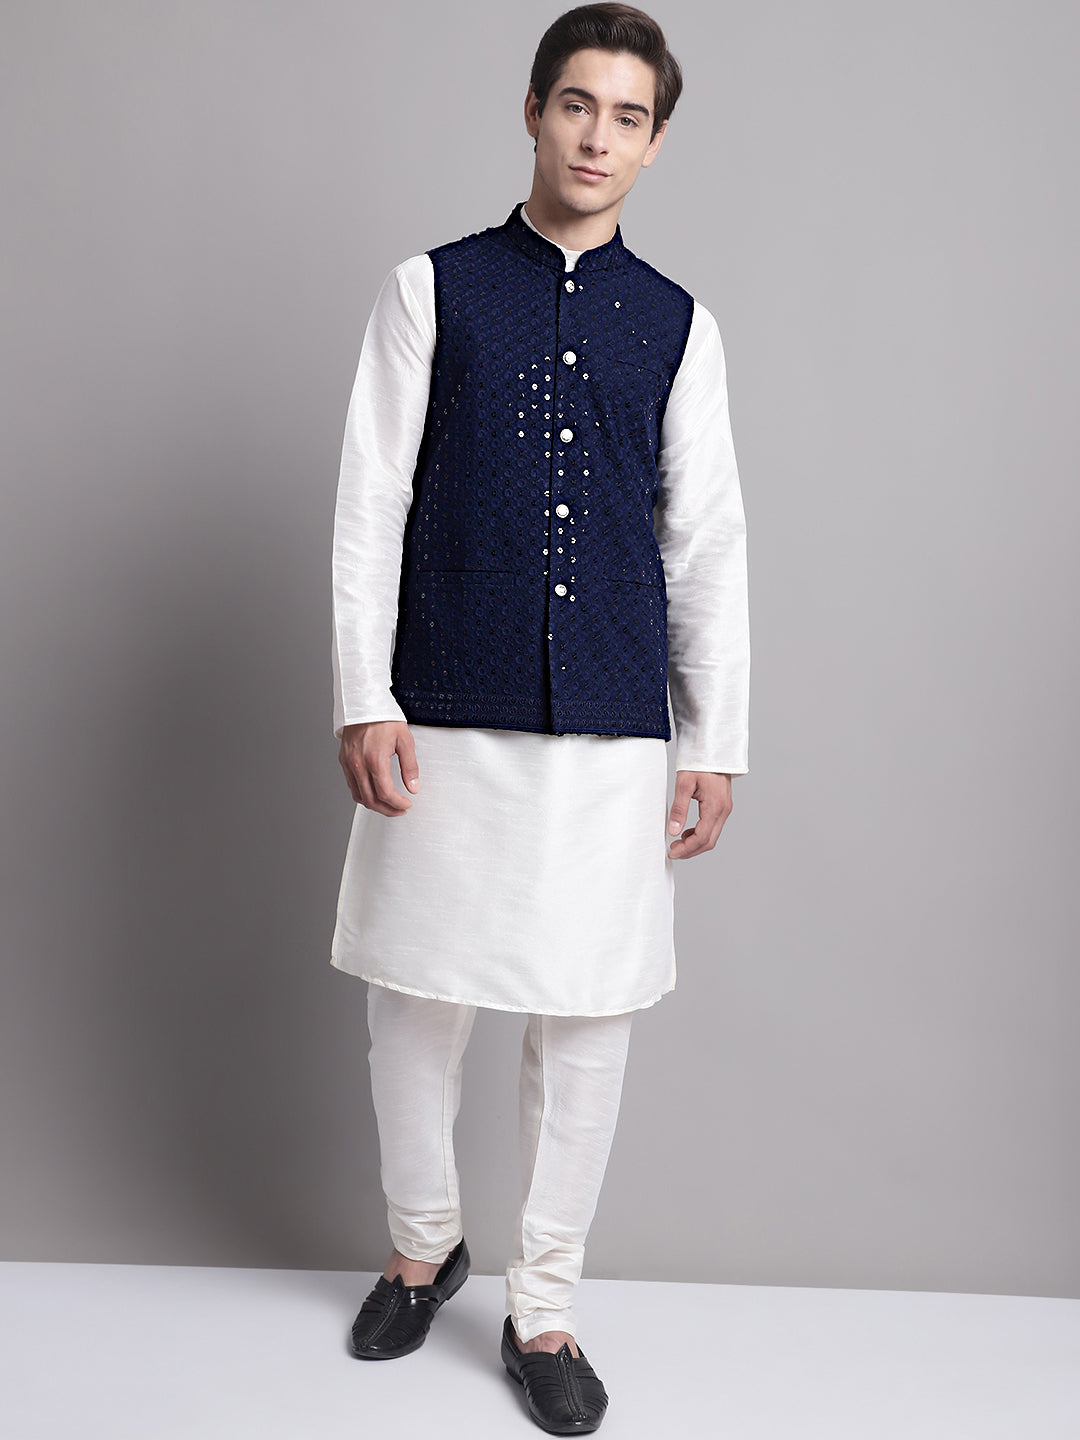 Men's Navy Blue Sequins and Embroidred Nehru Jacket With Solid Kurta Pyjama.